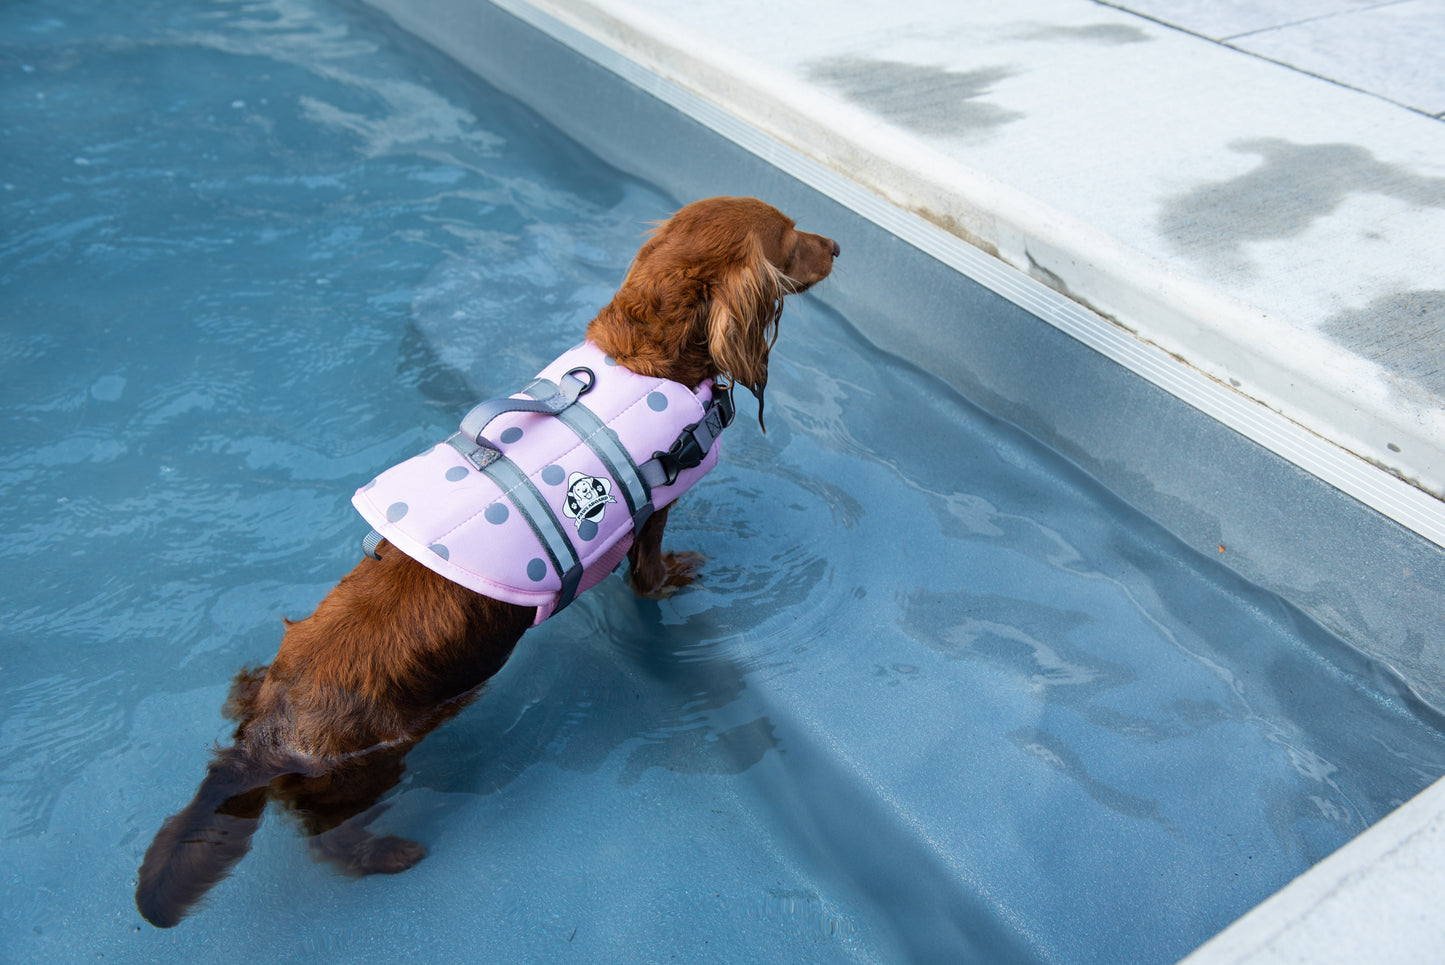 Long haired Dachshund standing in an in-ground pool. The dog is wearing a soft pink with grey polka dot life jacket that has reflective straps and a top rescue handle.